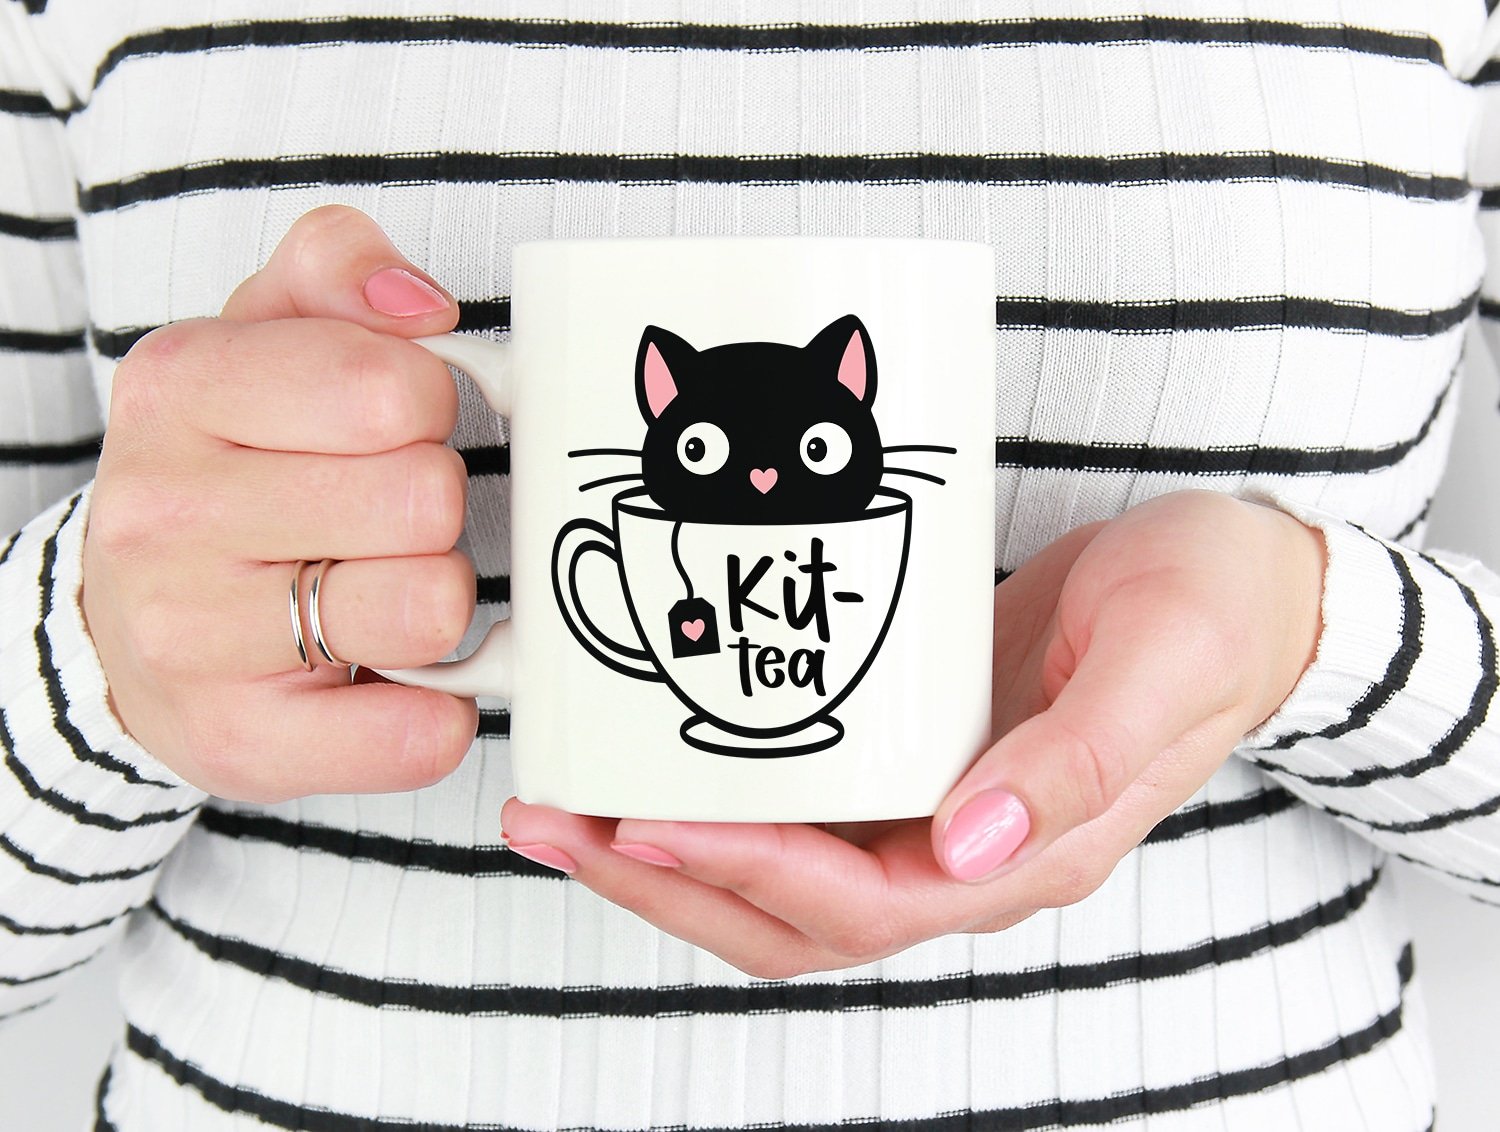 Hands holding a white mug with a "kit-Tea" design featuring a black kitten in a white teacup
